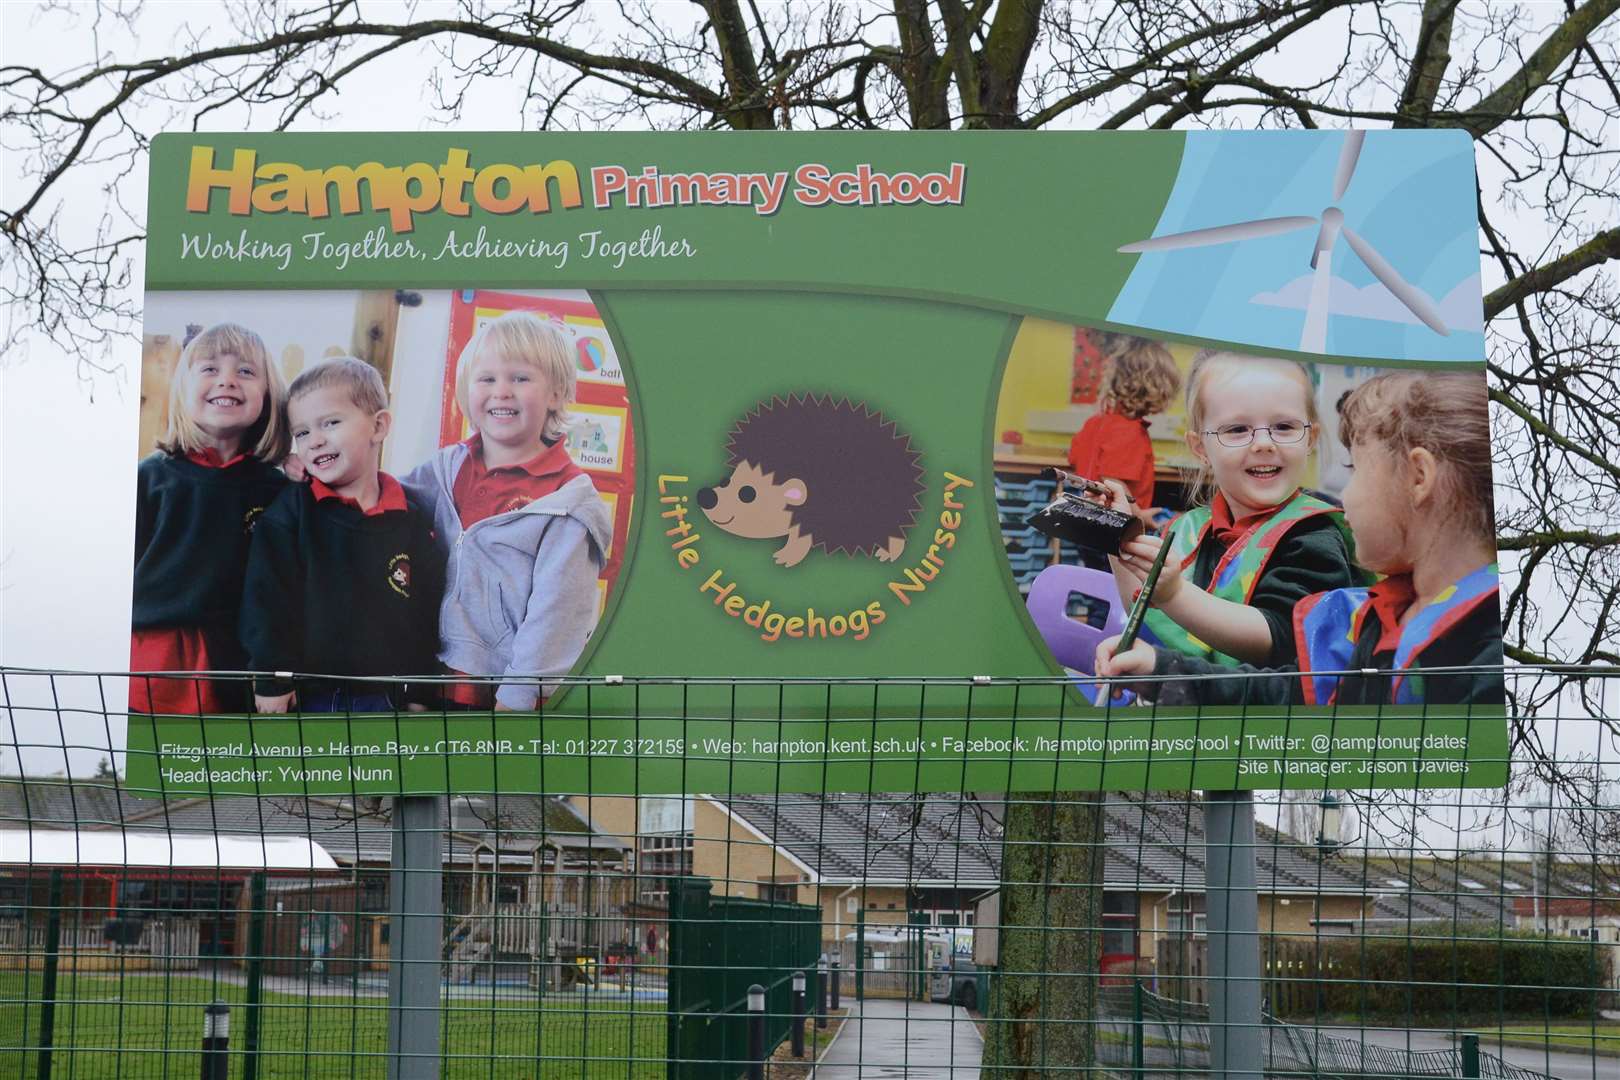 90 children from Hampton Primary School are self-isolating after a child tested positive for coronavirus